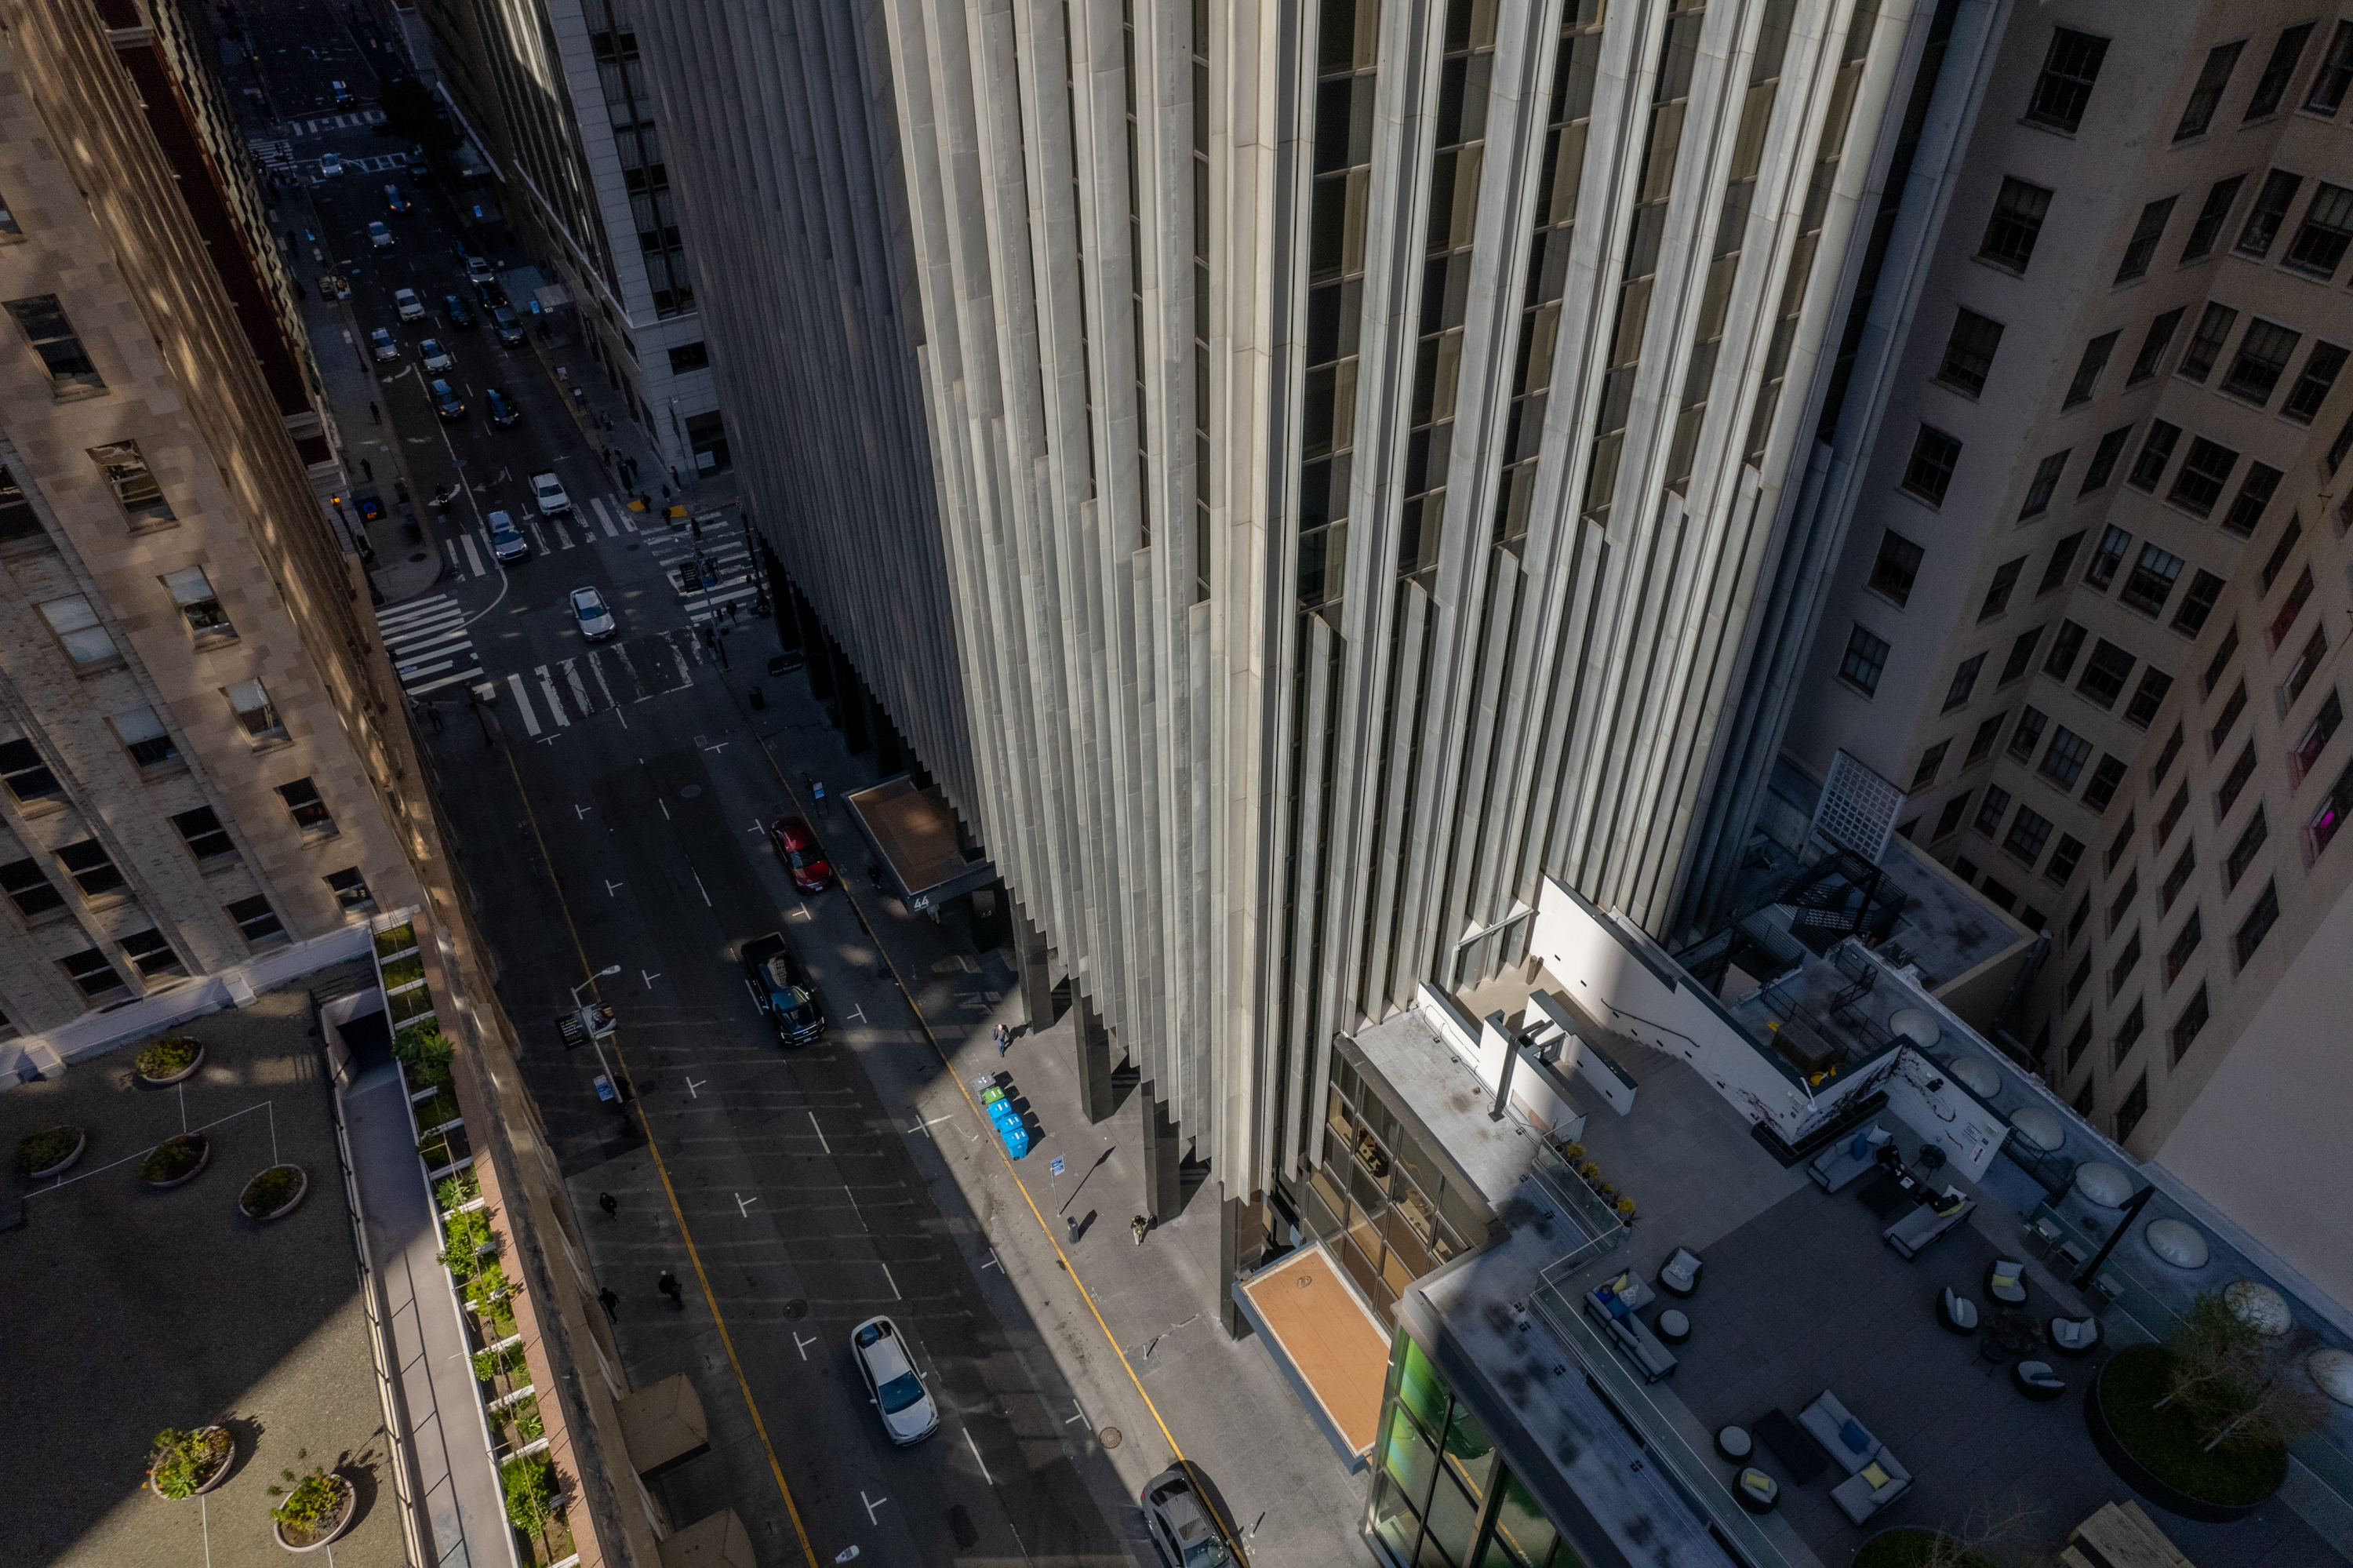 Aerial view of city street between tall buildings, casting shadows, with visible cars and a rooftop patio.